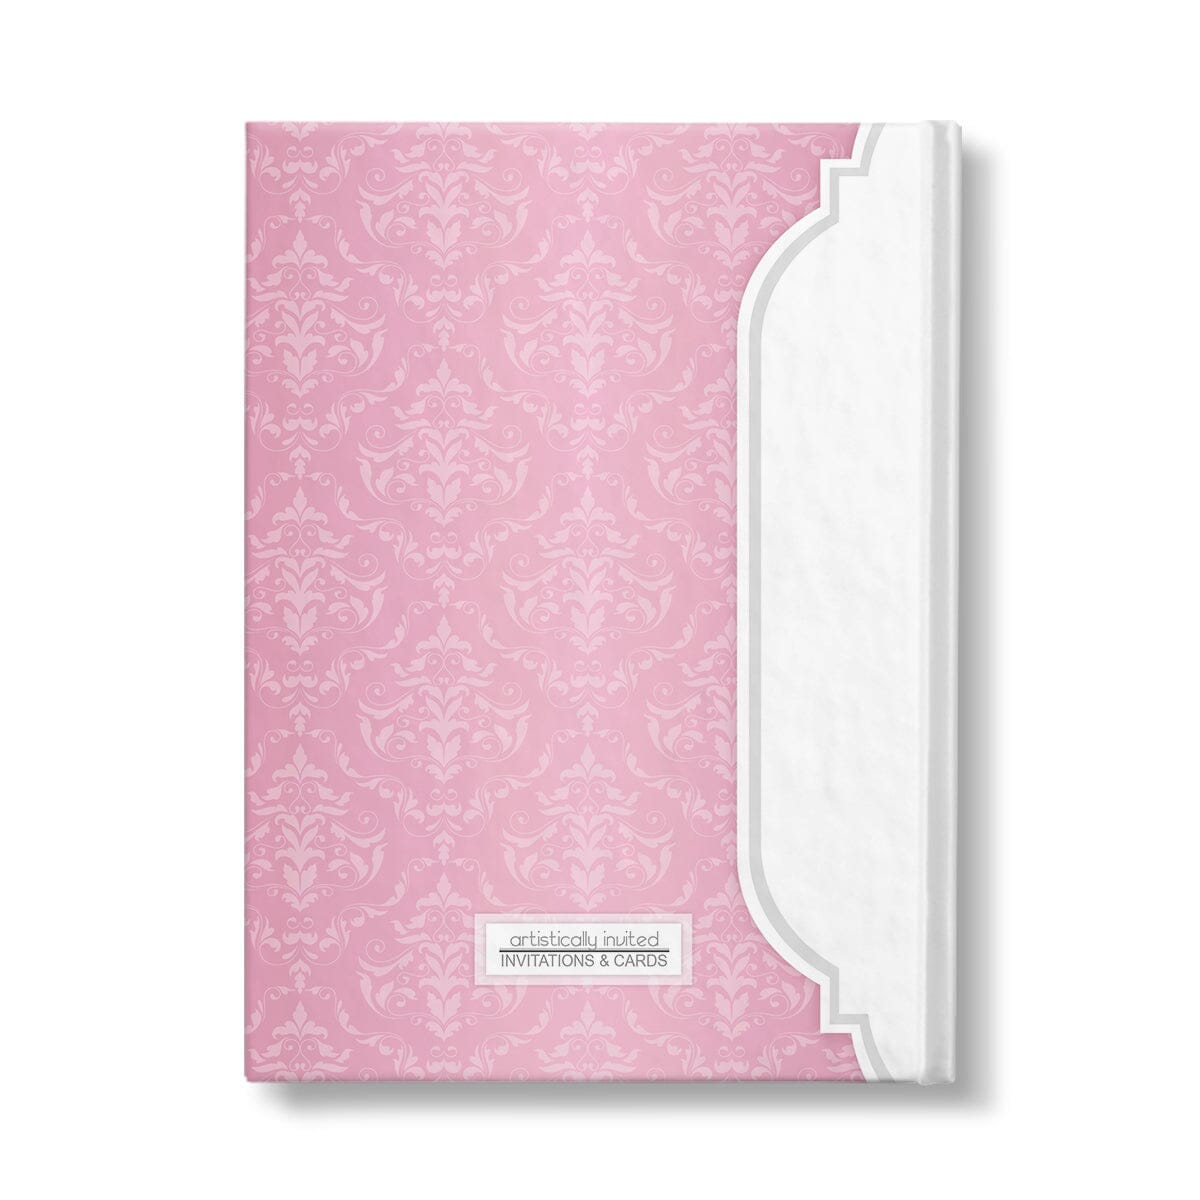 Personalized Pink Damask Journal at Artistically Invited. Back side of the book.